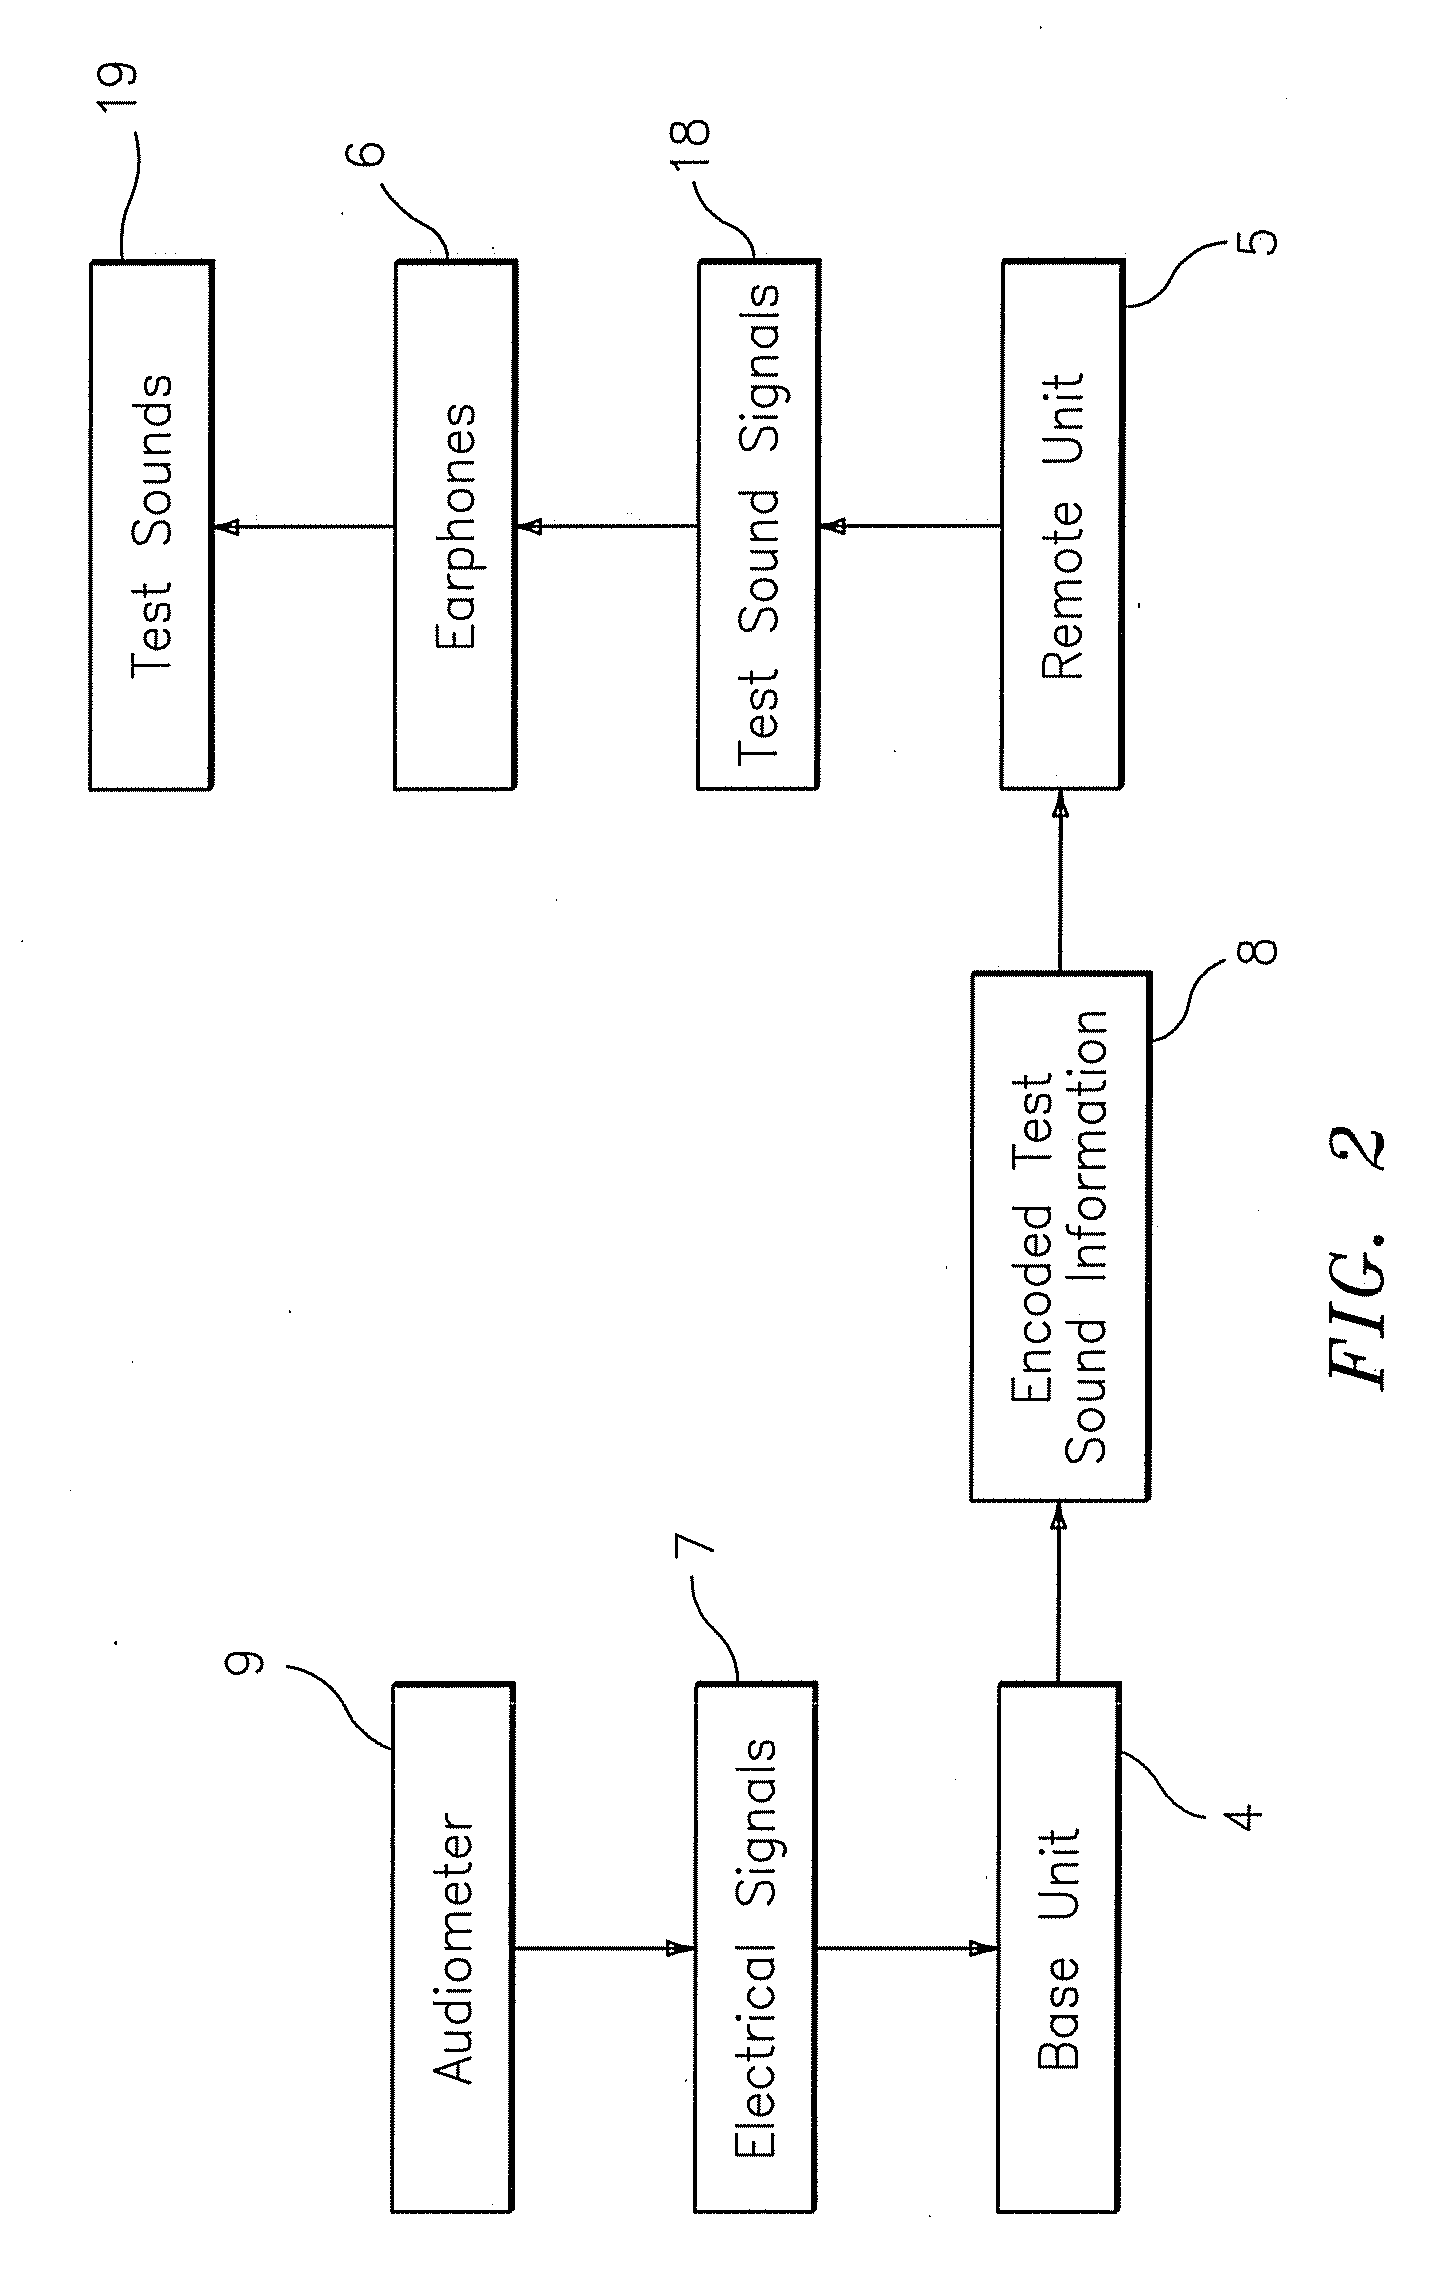 Wireless interface for audiometers